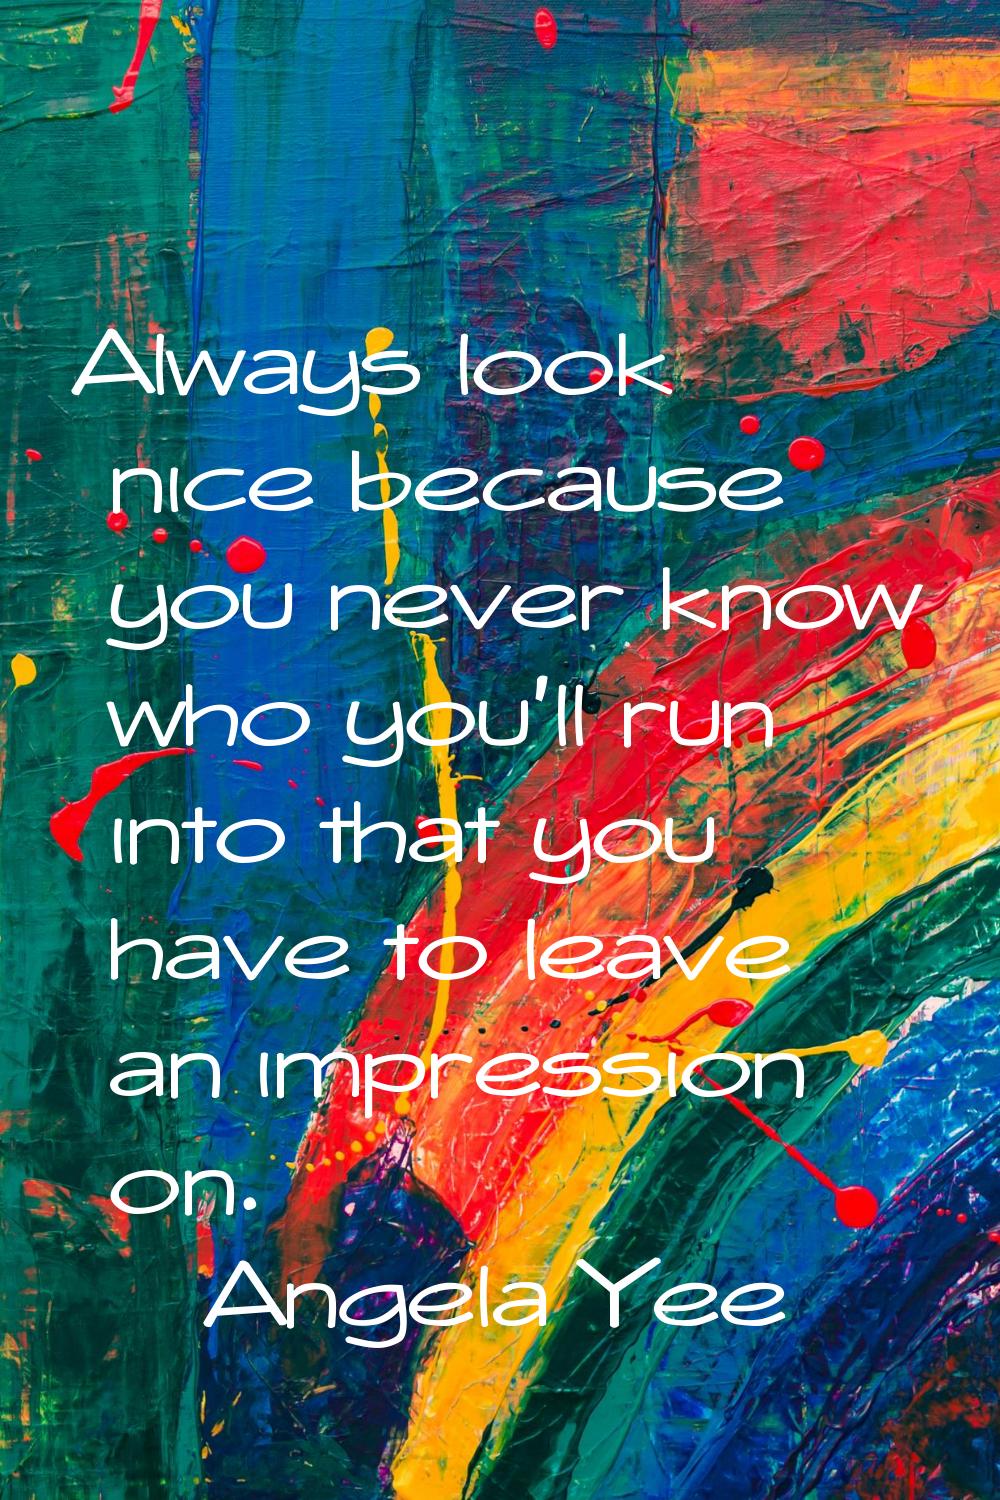 Always look nice because you never know who you'll run into that you have to leave an impression on